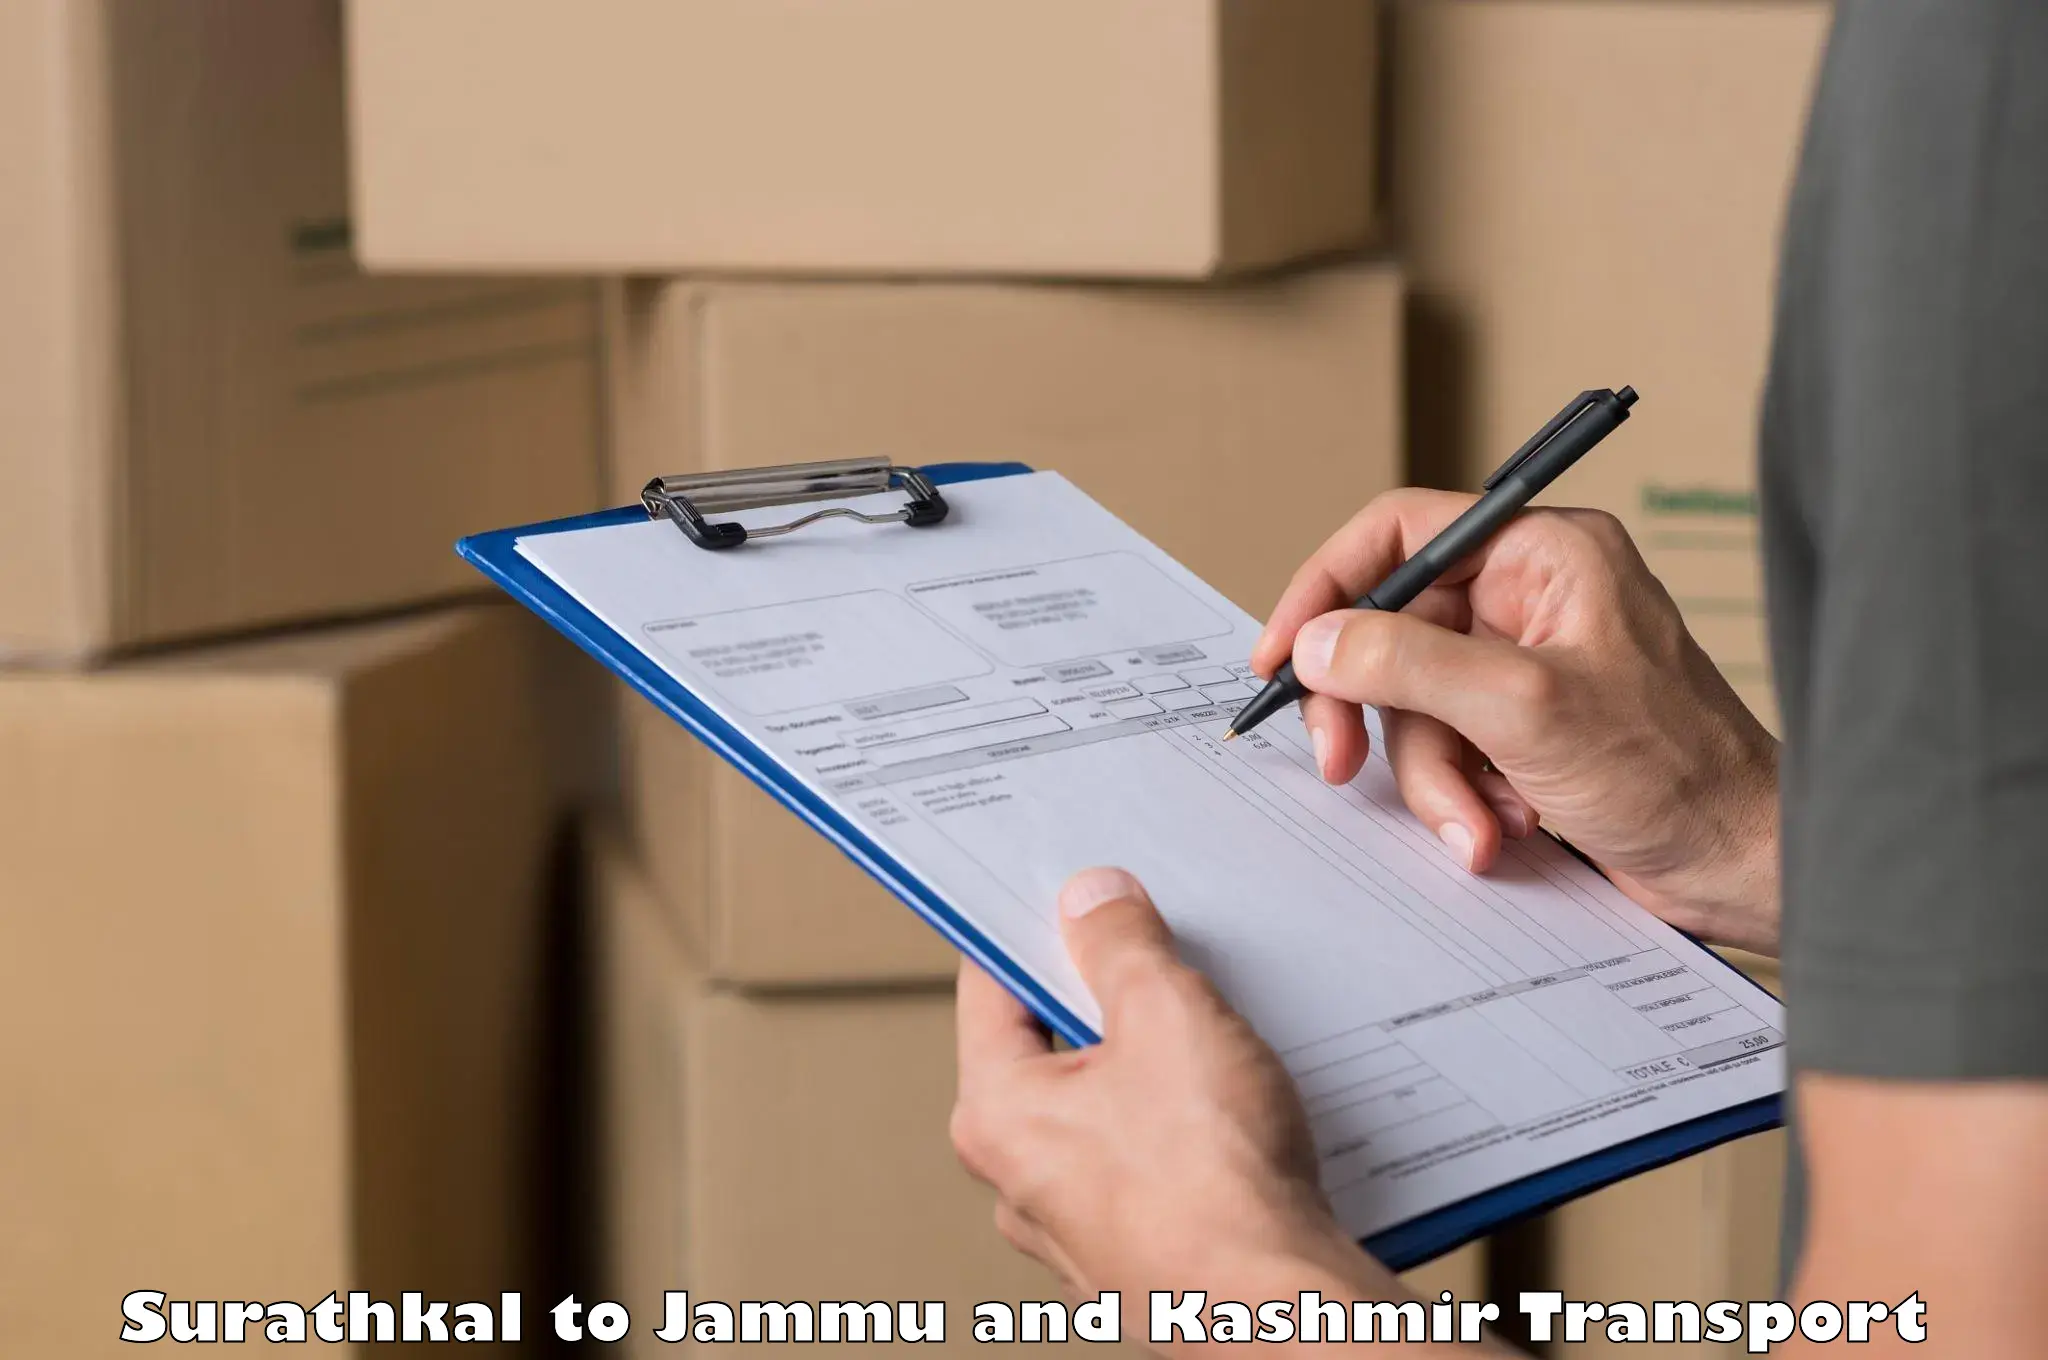 Goods delivery service Surathkal to Pulwama